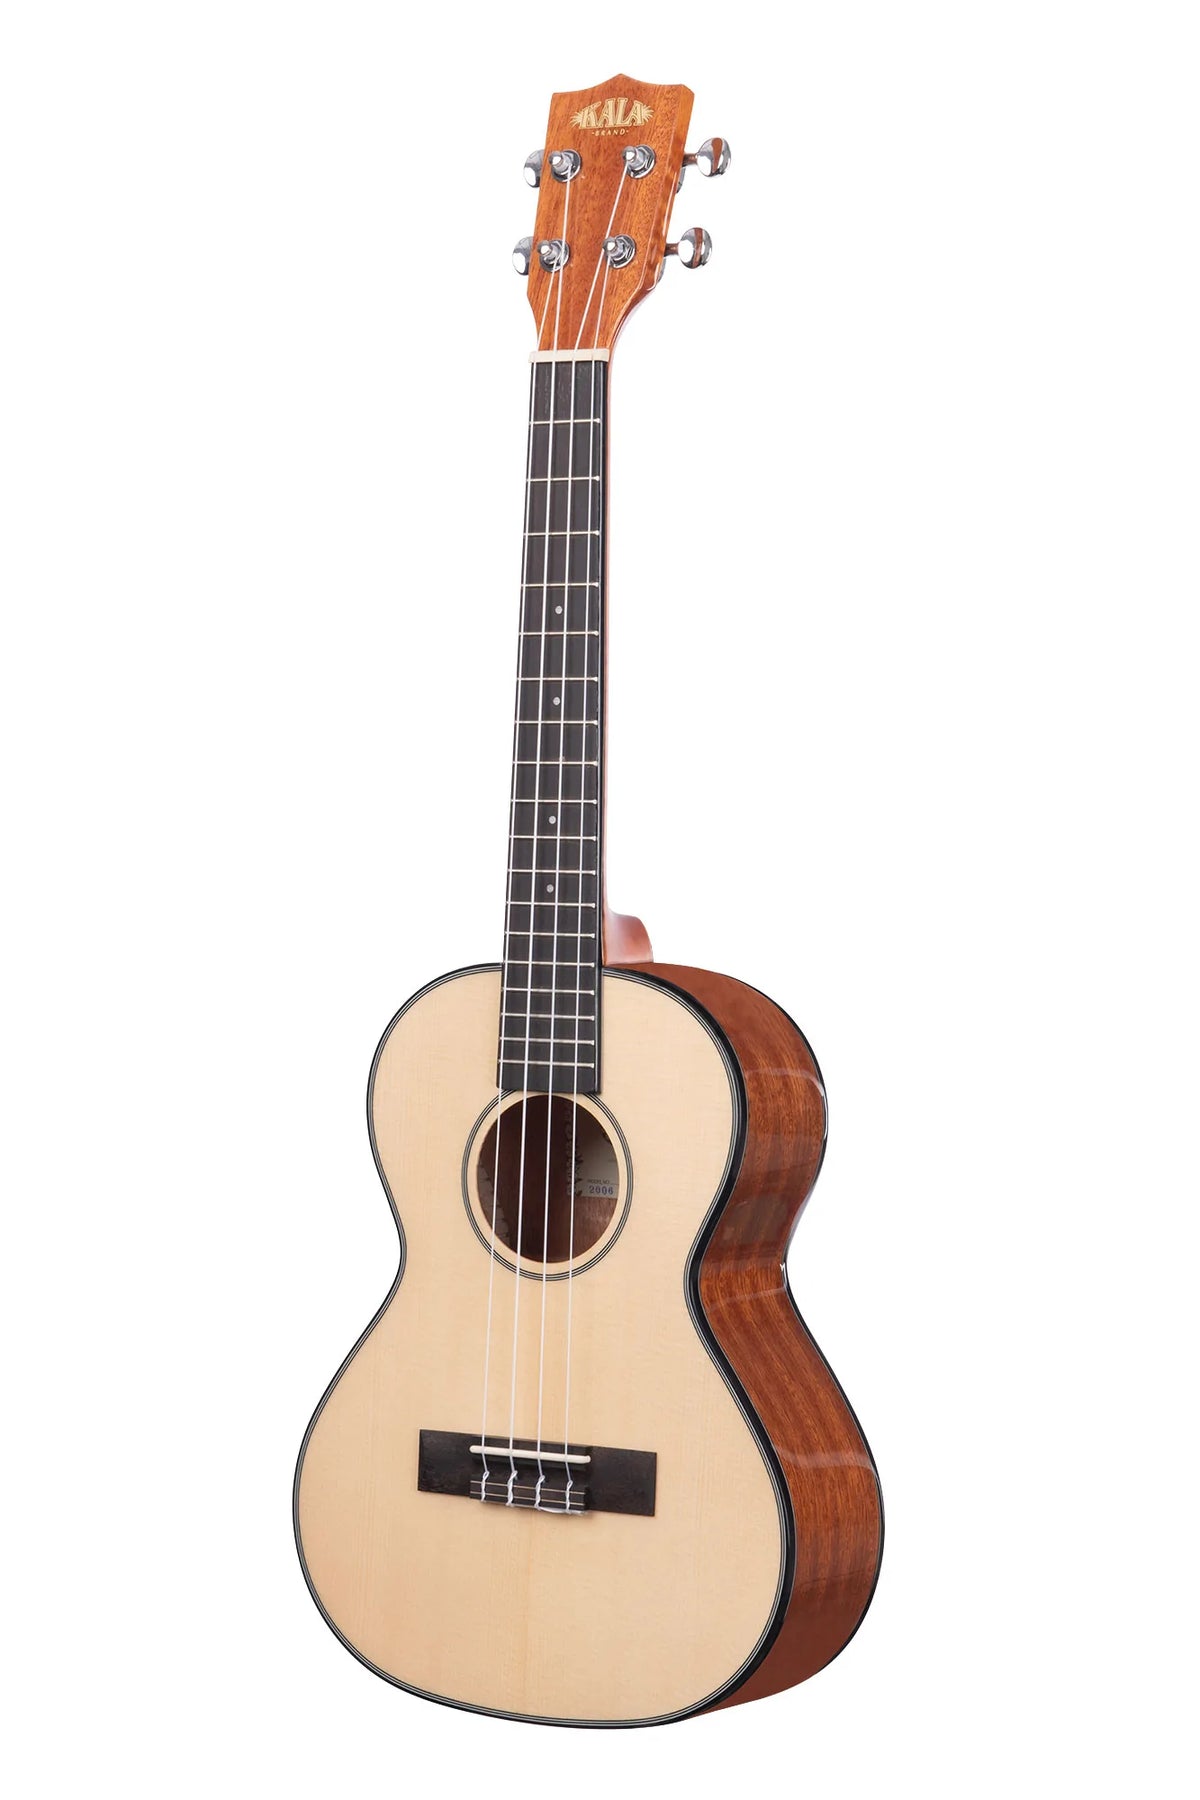 KA-STG Solid Spruce Top with Mahogany back and sides, Tenor Size